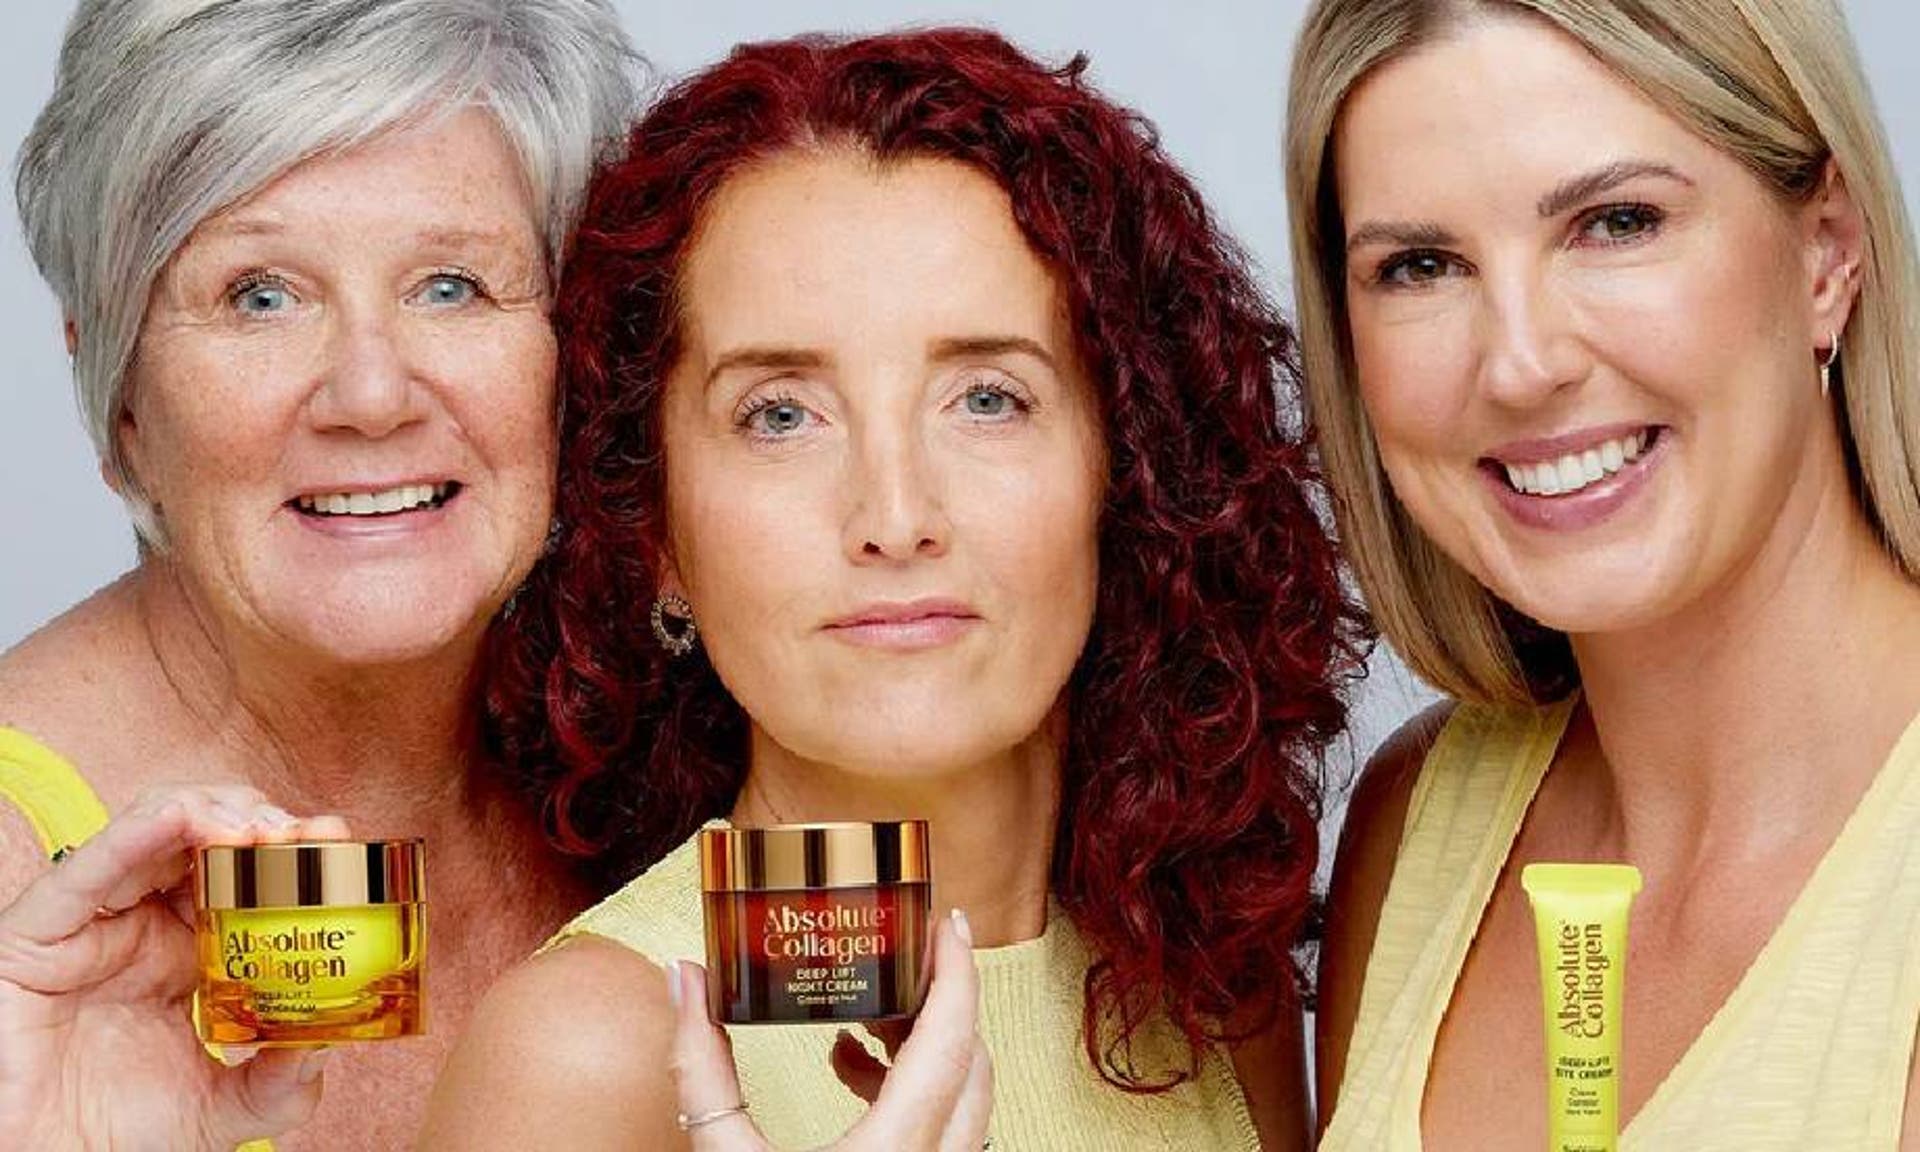  A close up of three women holding various products from Absolute Collagen, smiling. 